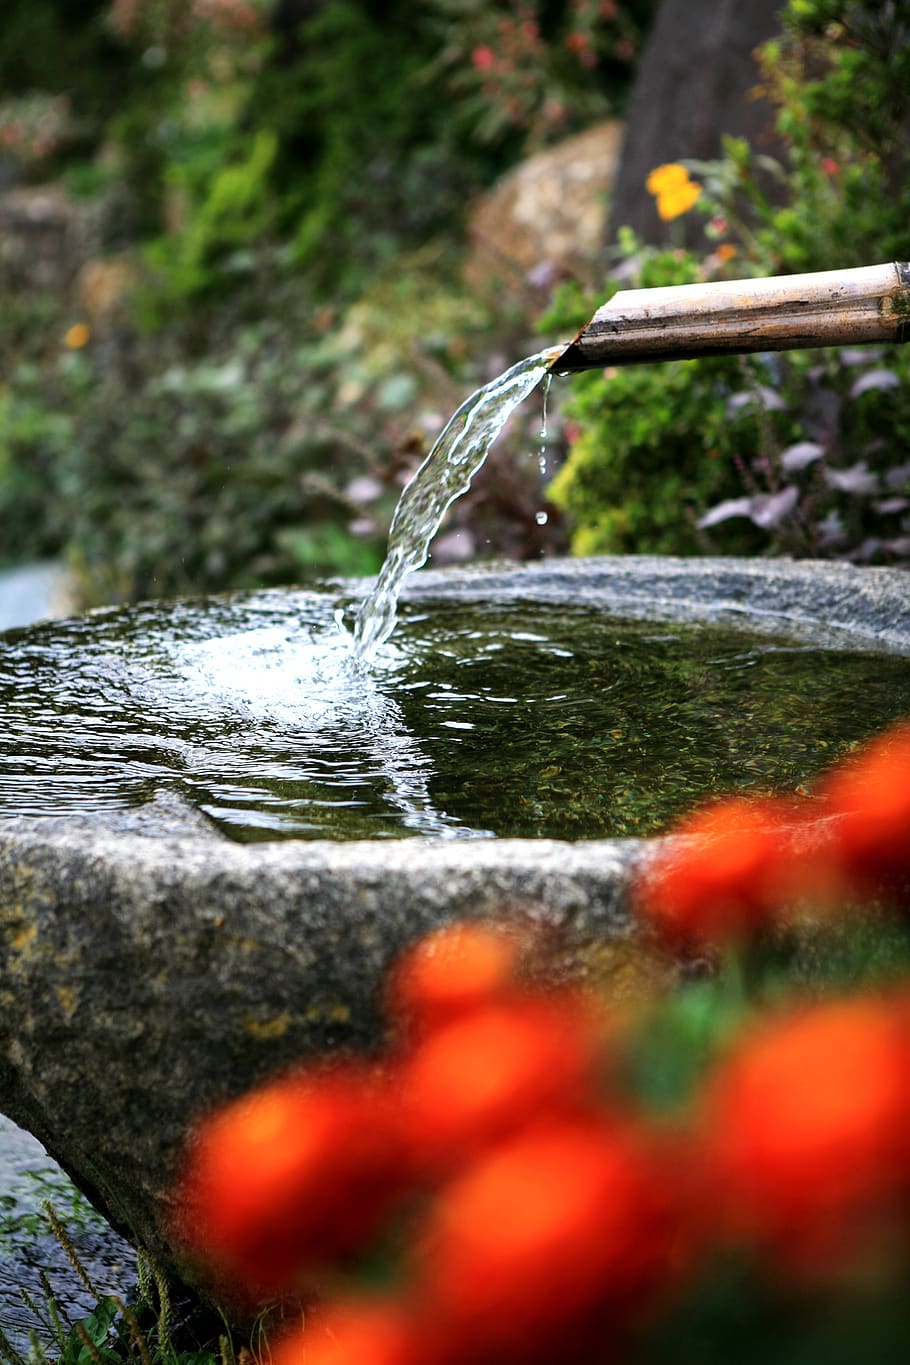 gutter, ong reach glands, drinking water, medicinal water, water, motion, nature, selective focus, day, falling